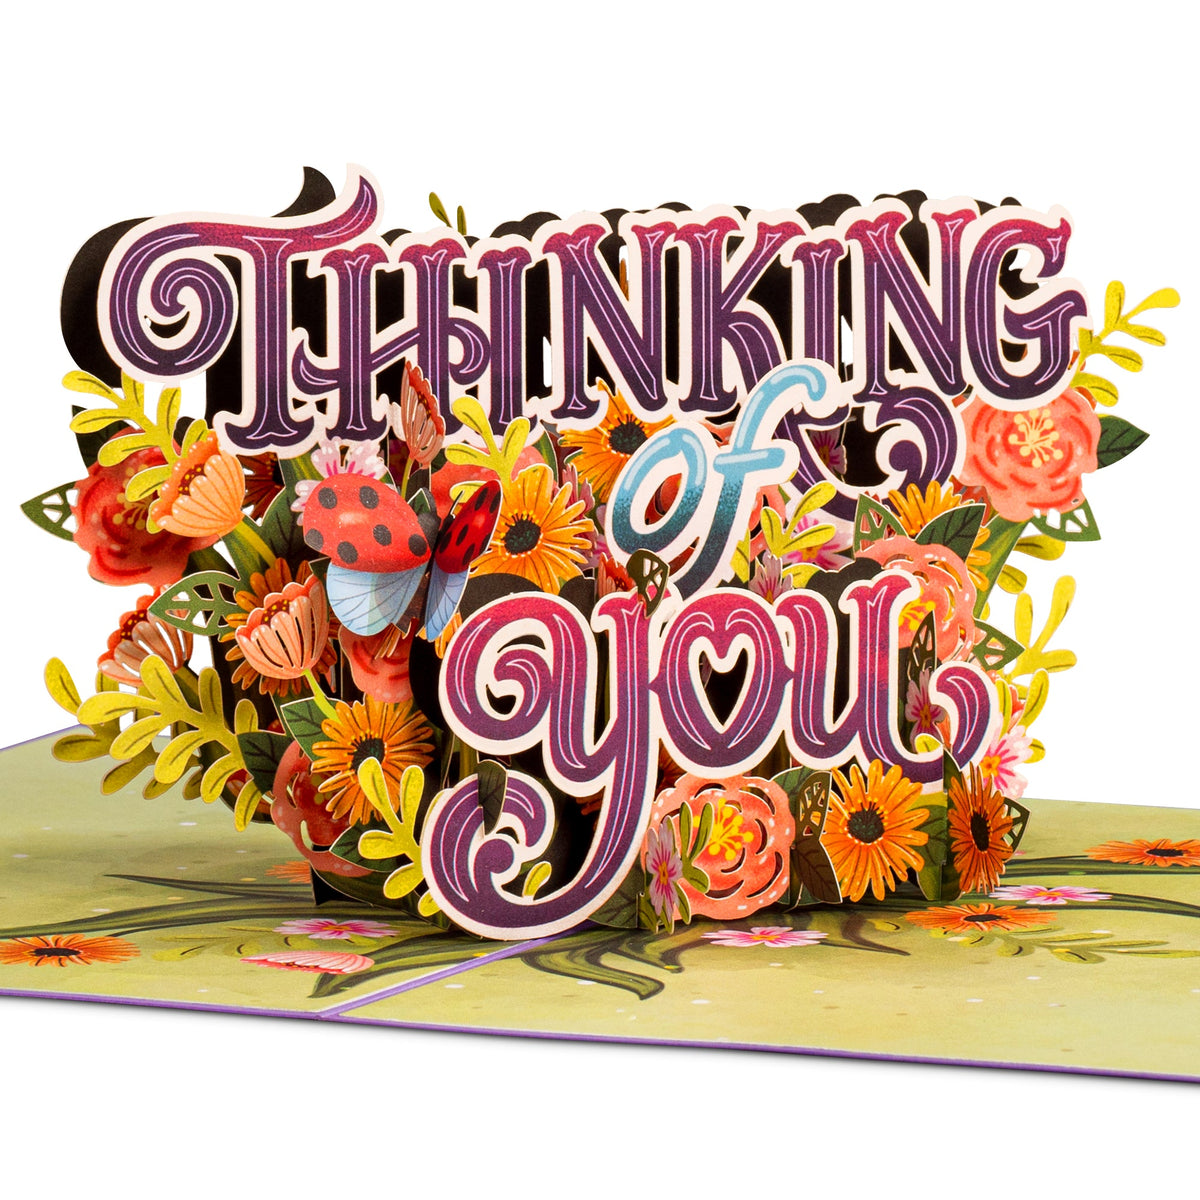 4,889 Thinking You Greeting Cards Images, Stock Photos, 3D objects